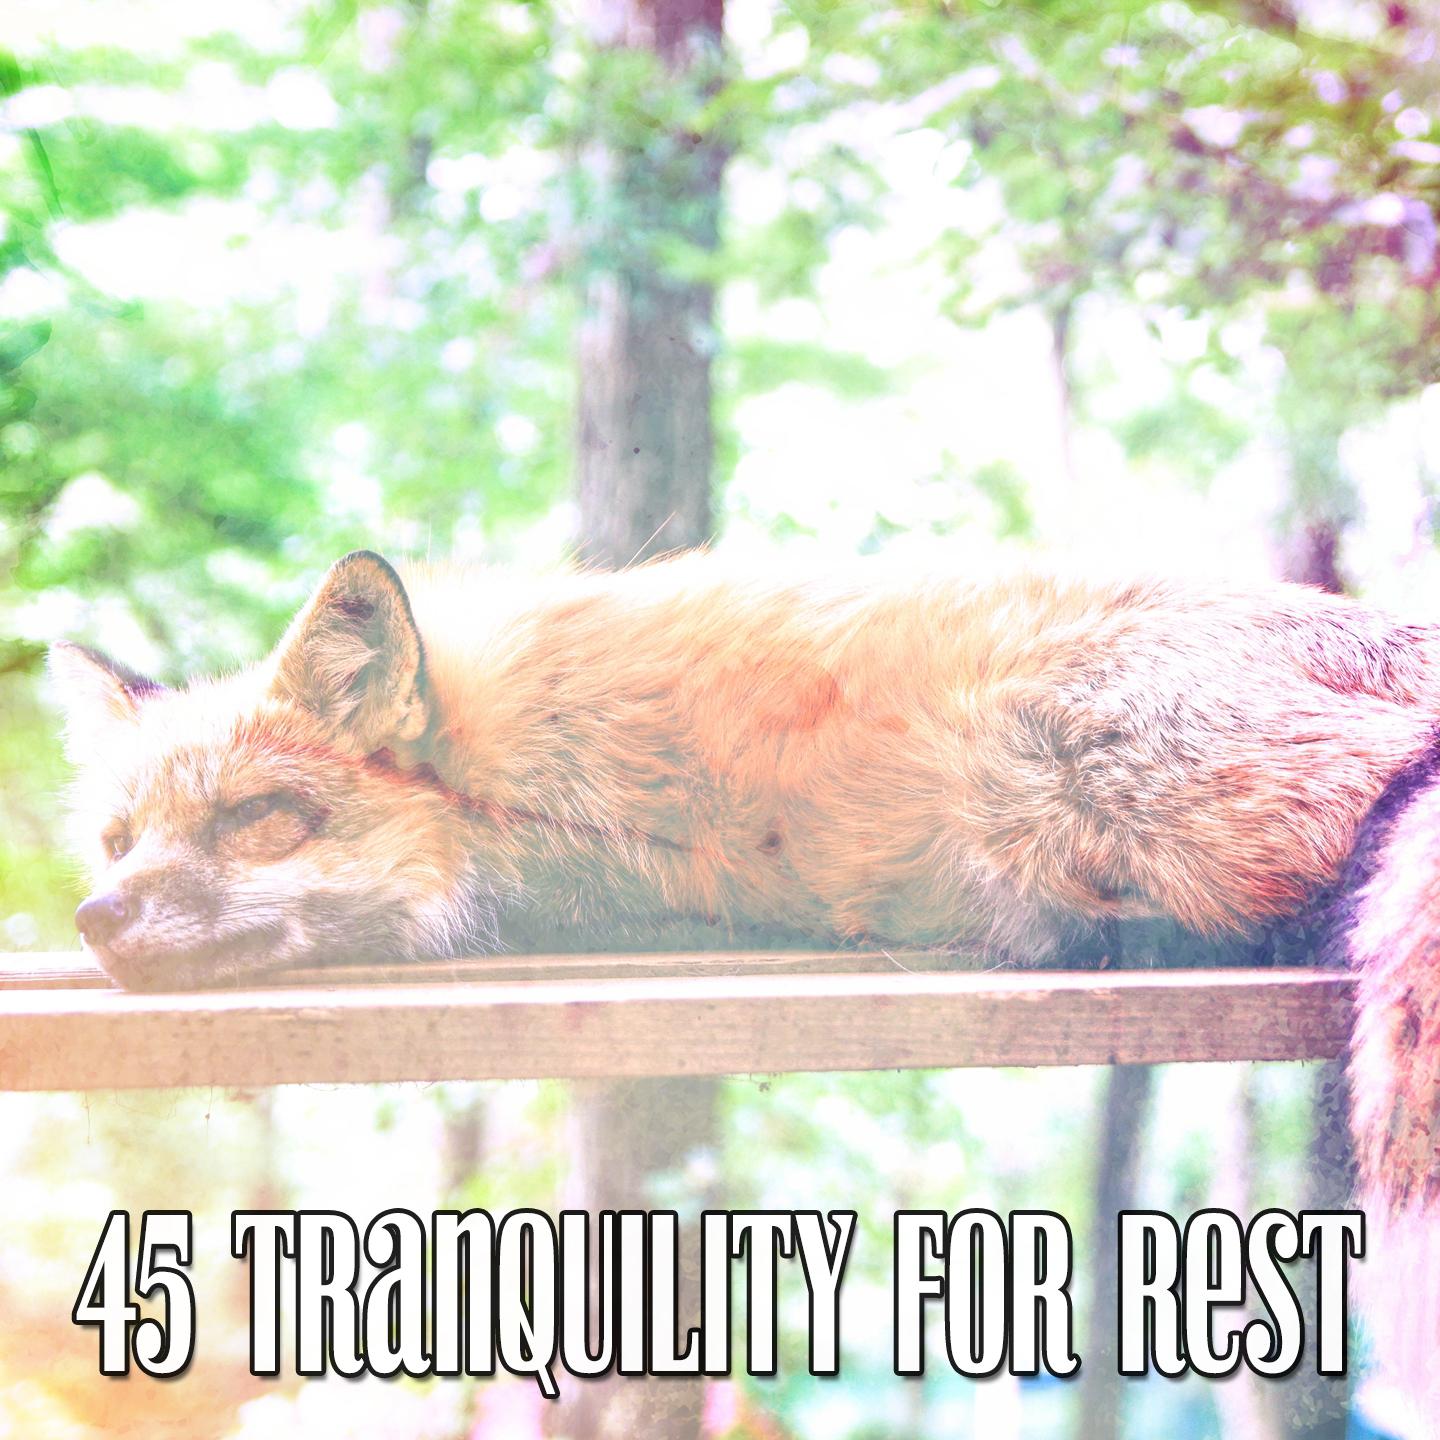 45 Tranquility For Rest